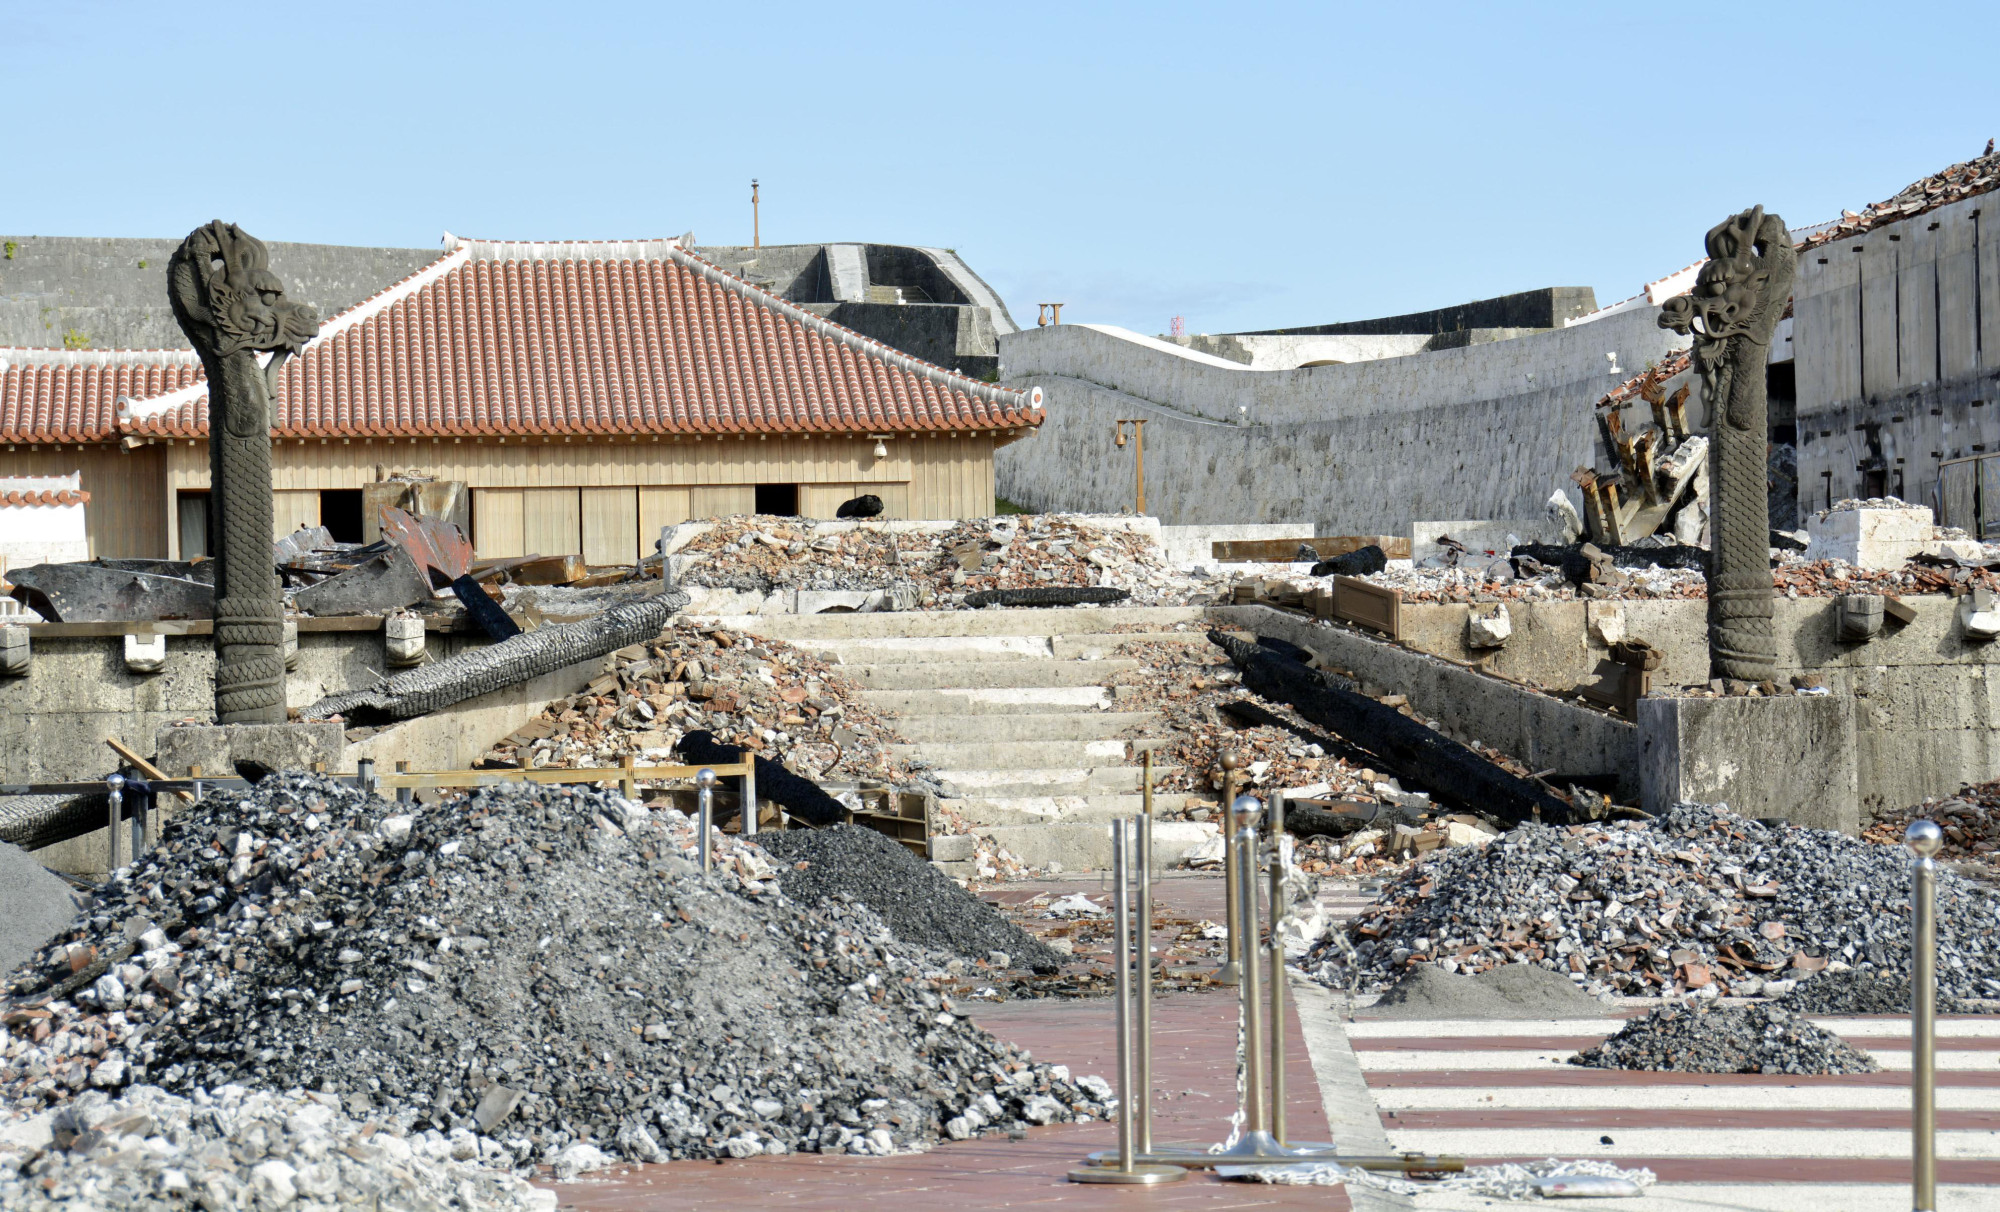 The burned-out remains of buildings at Shuri Castle, the main symbol of Okinawa Prefecture, are shown in Naha after a fire destroyed part of the UNESCO World Heritage site in October. | KYODO